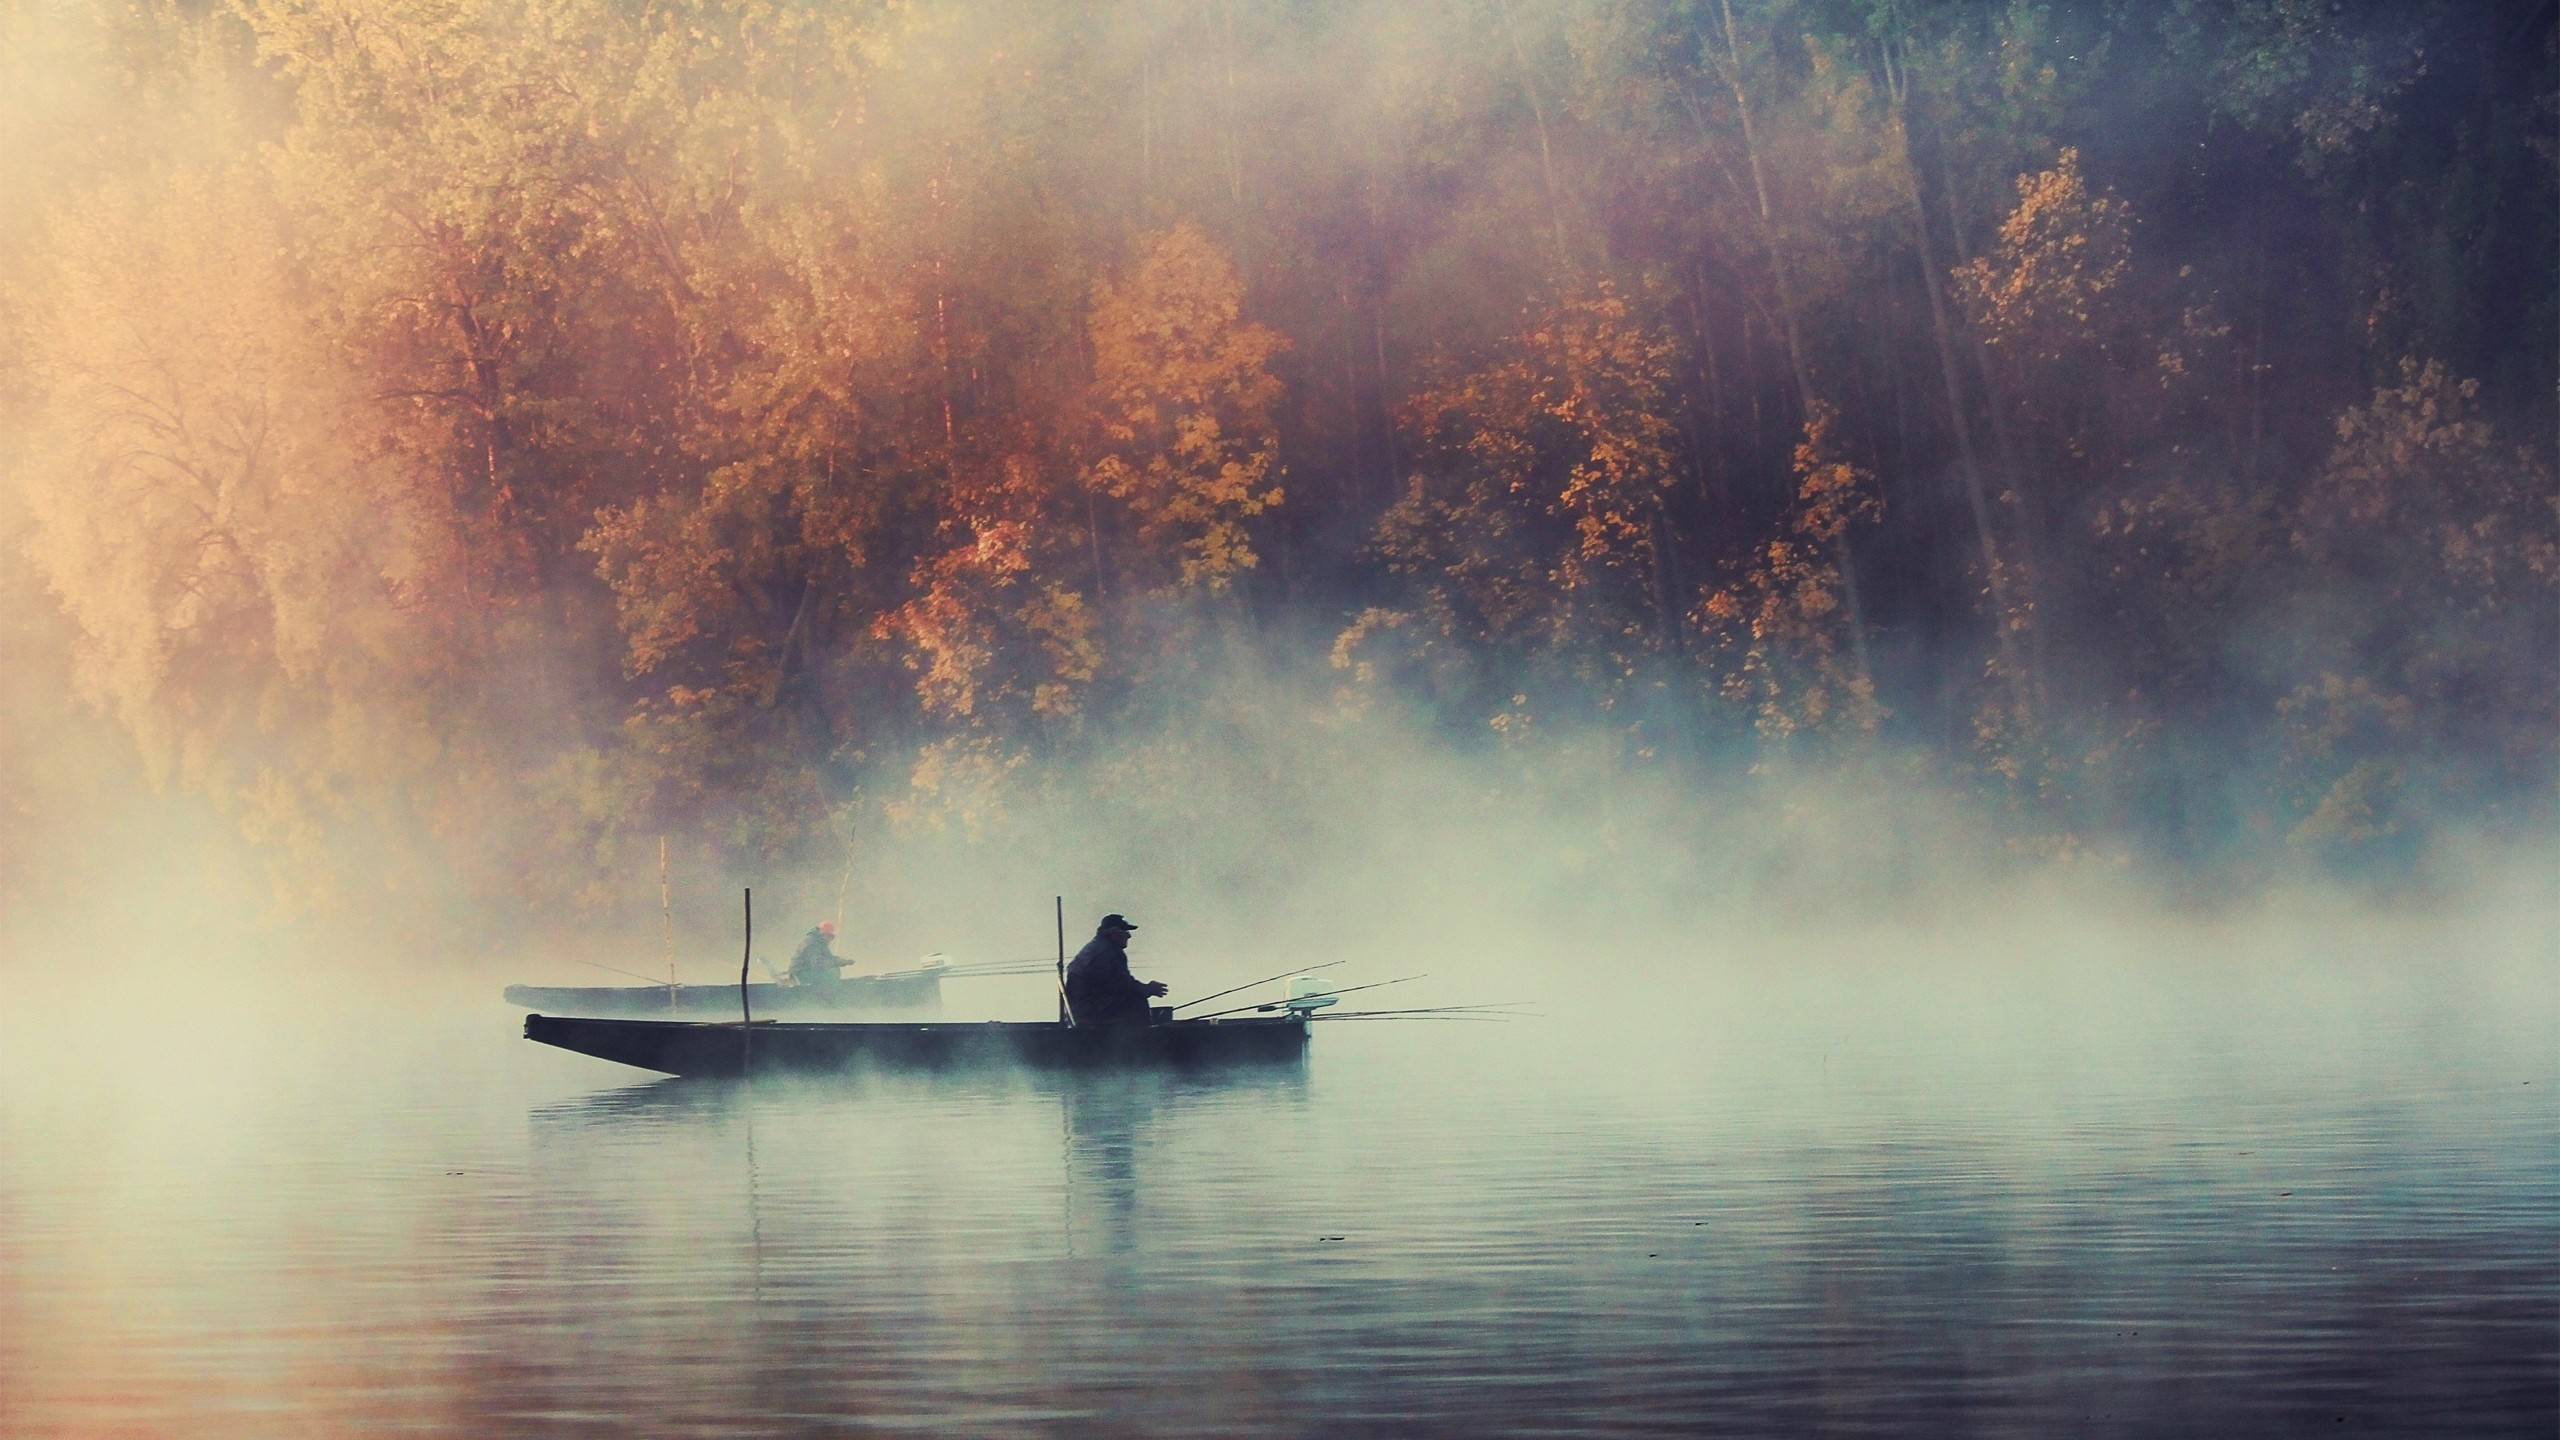 General 2560x1440 nature landscape trees water lake boat mist morning fisherman fall forest men fishing